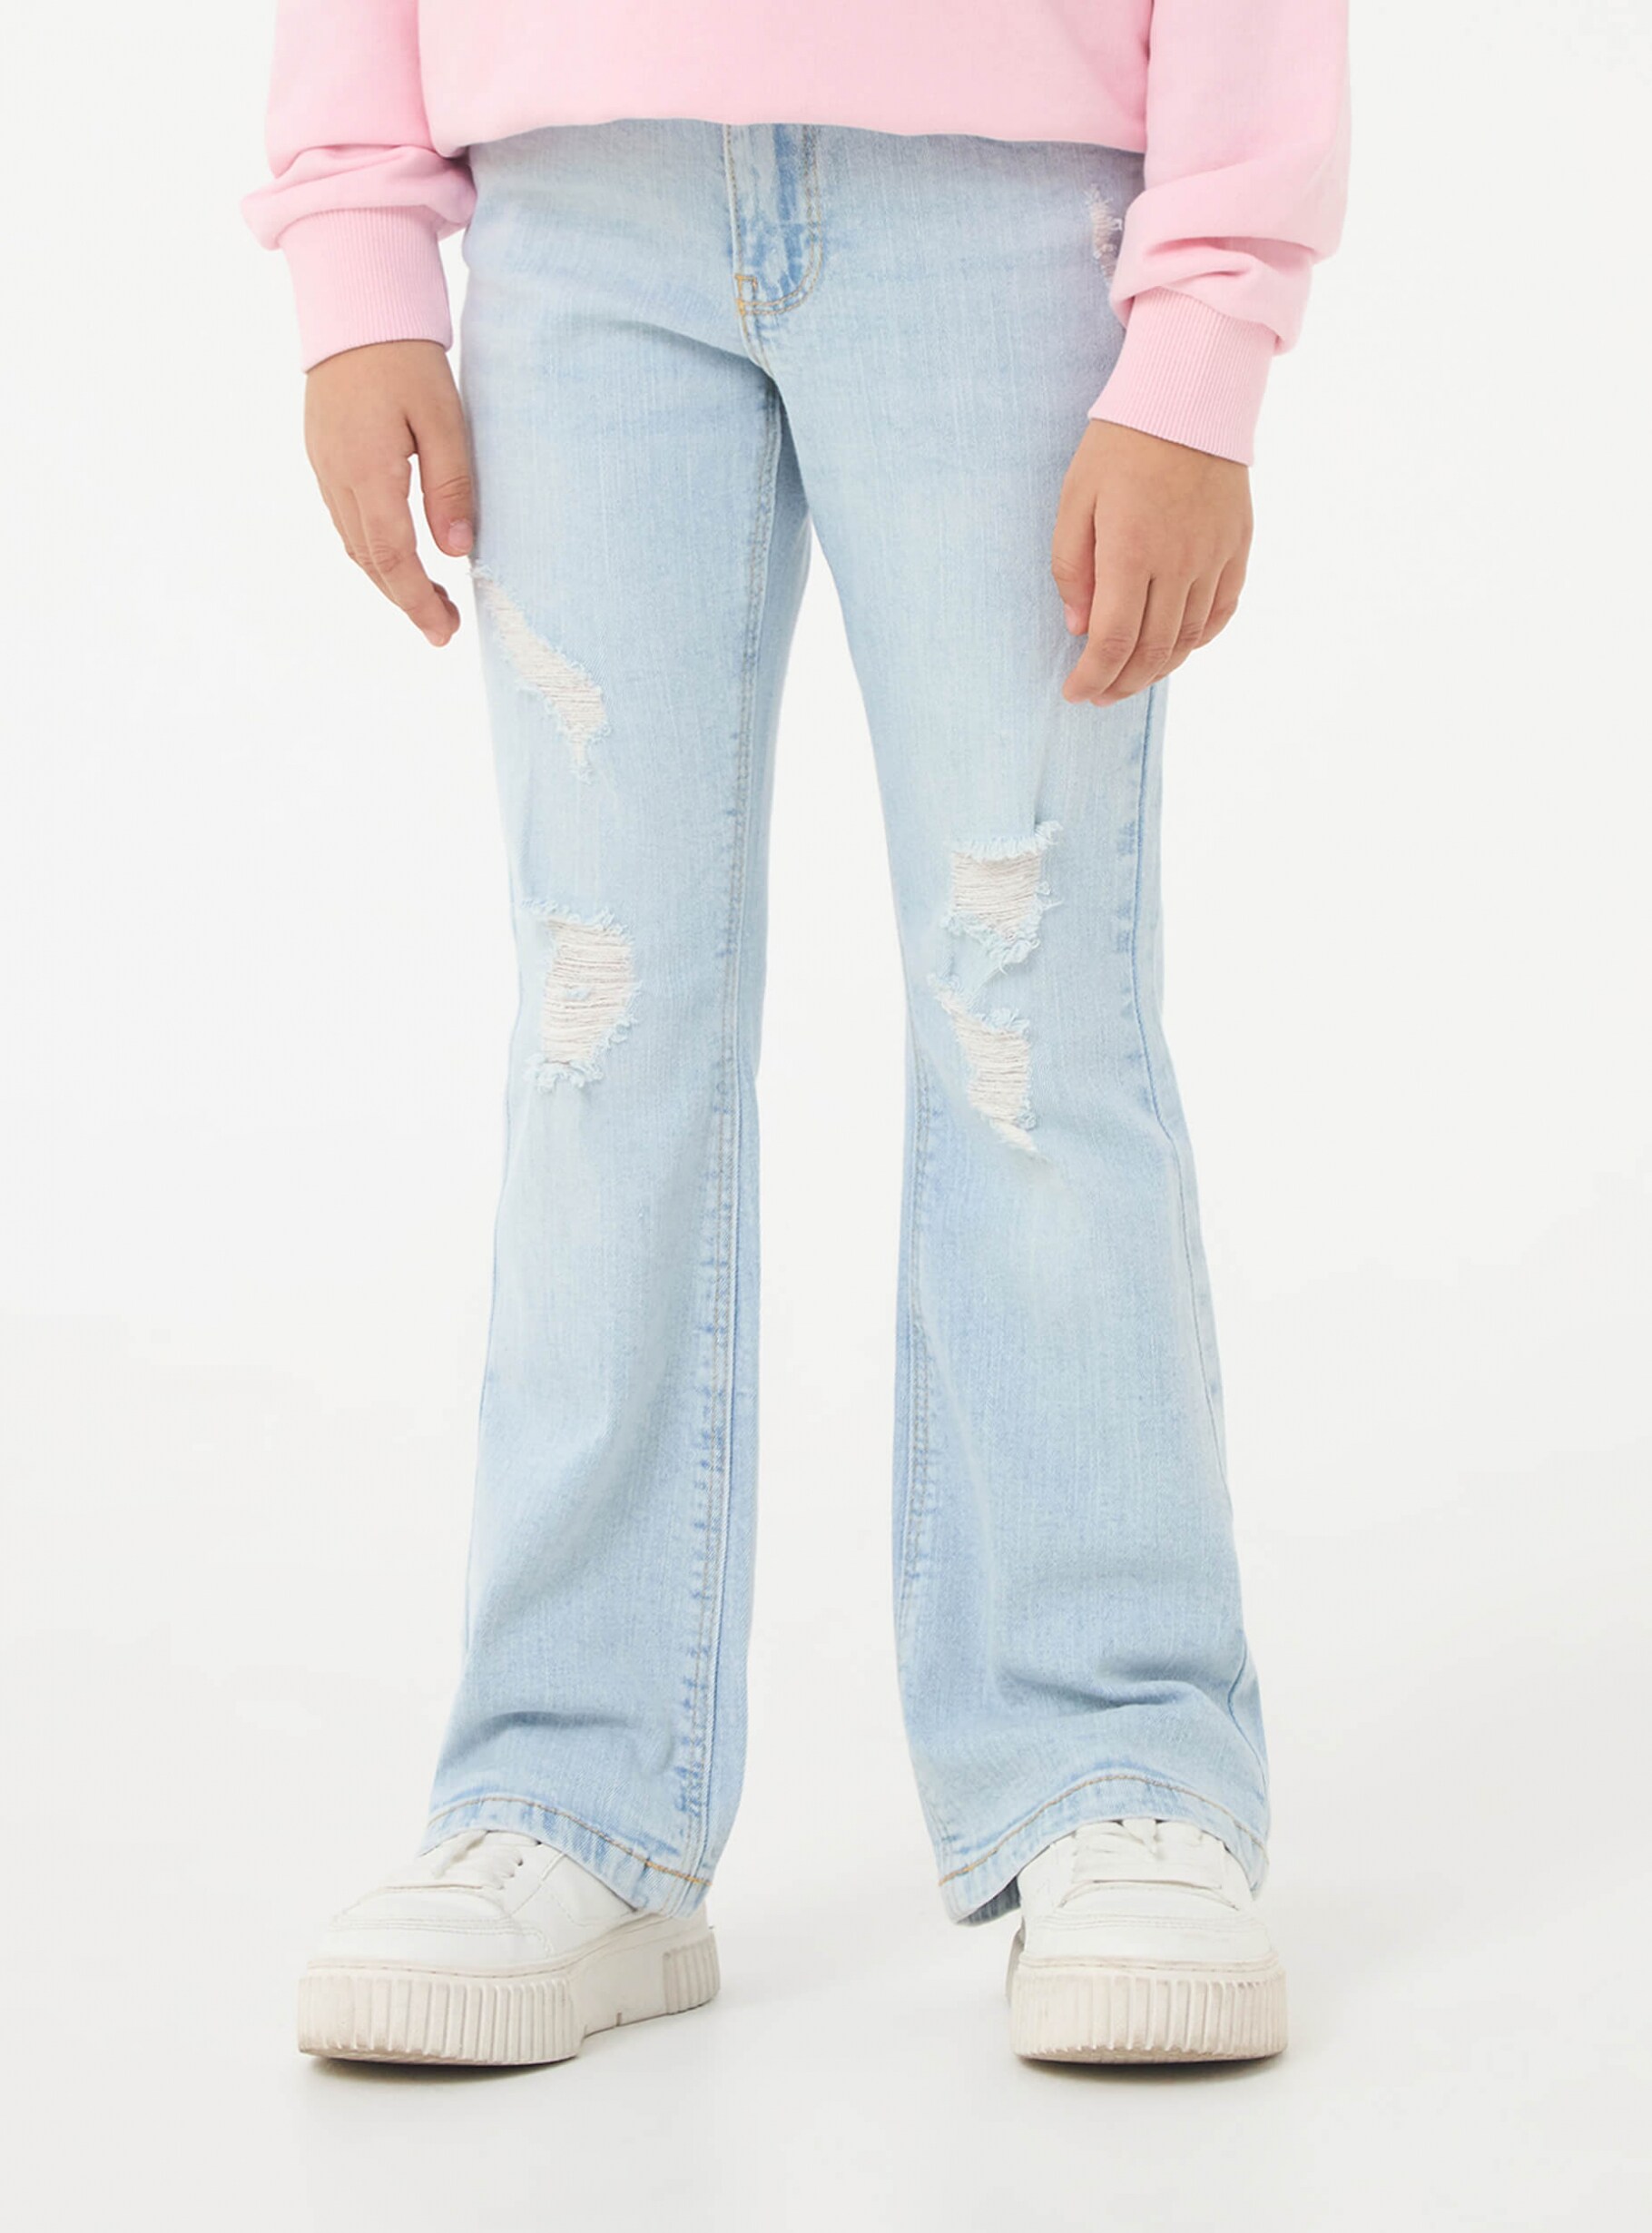 New Look flared jeans with zip fastening in light blue wash